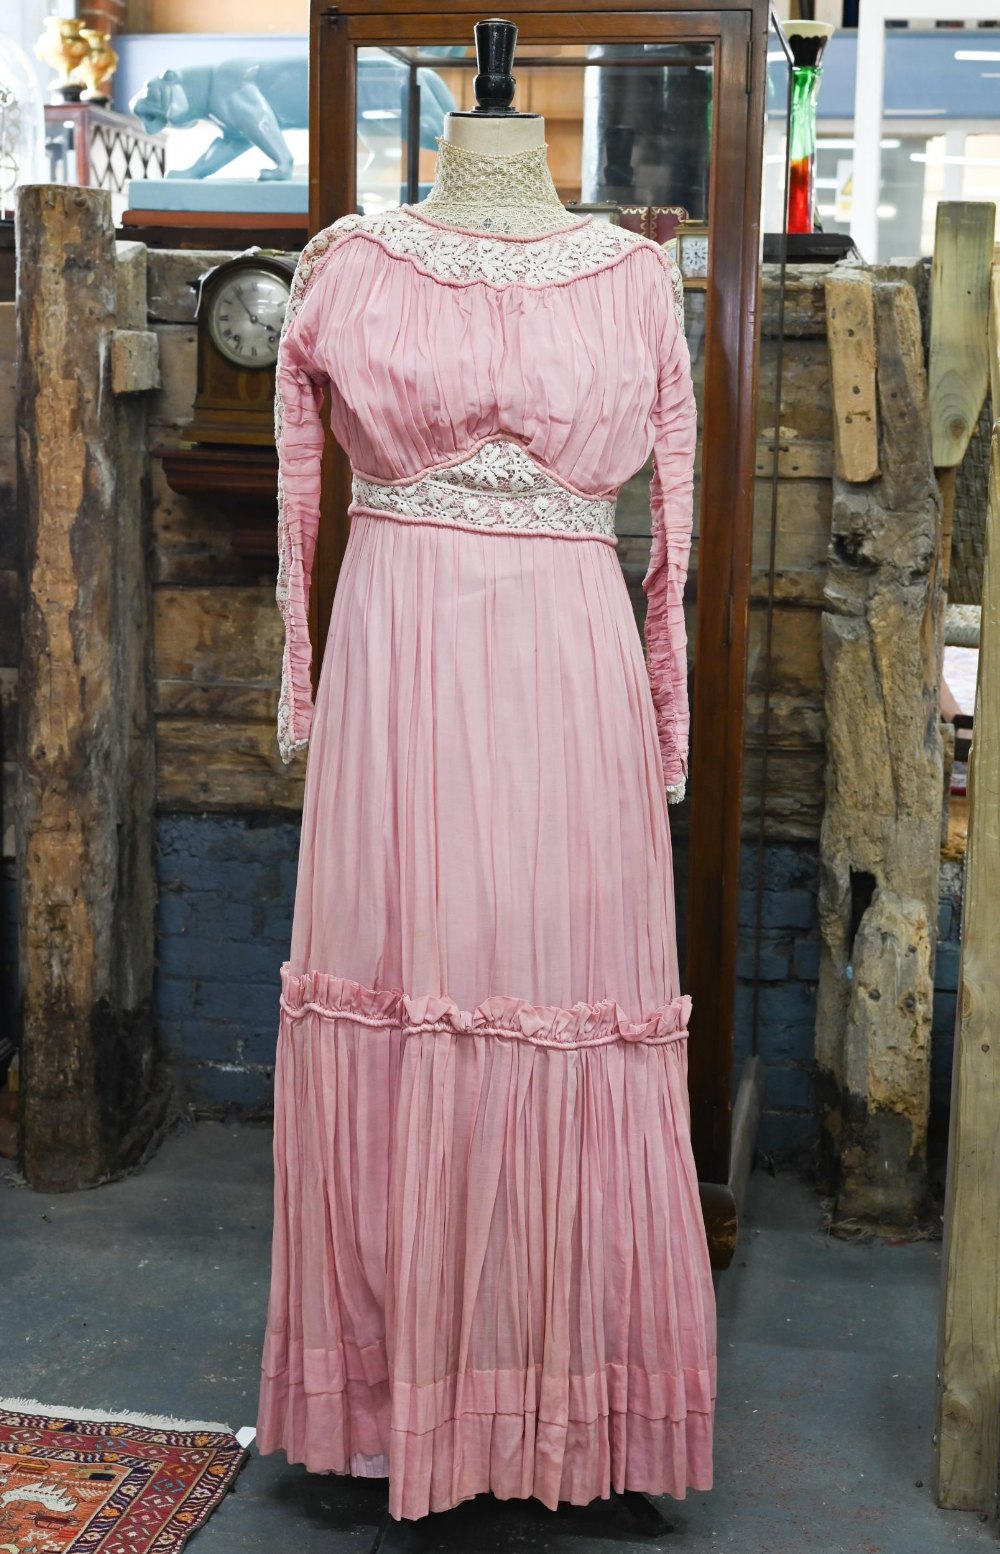 An Edwardian pink silk, lace and crochet dress, 150 cm from collar to hem to/w a quantity of vintage